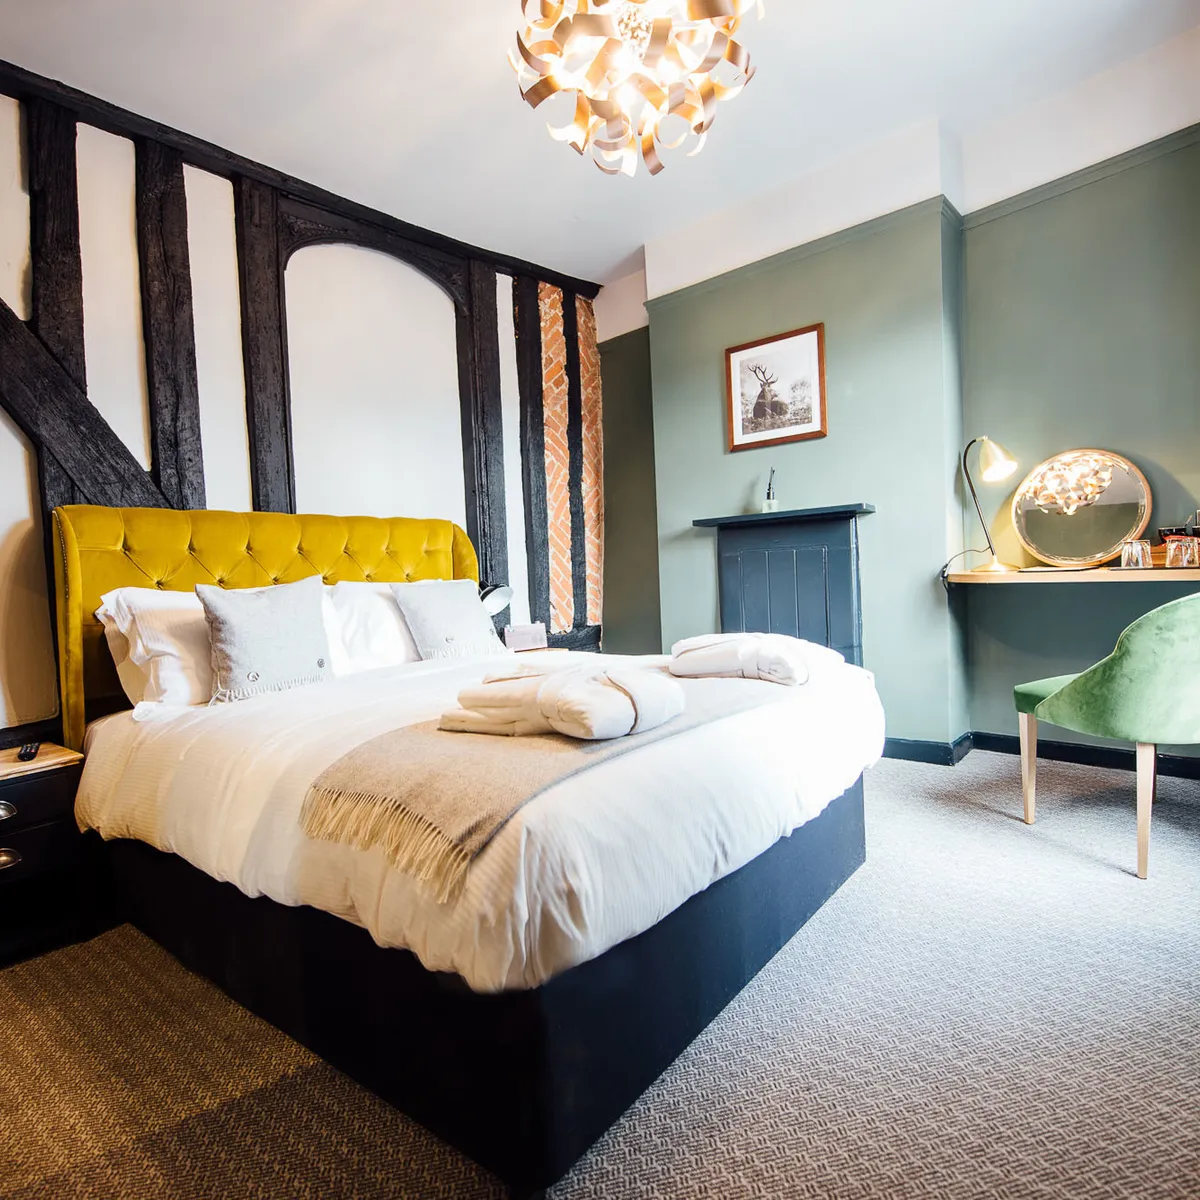 Hotel Room At The White Hart Pub Restaurant And Hotel In Ampthill Bedfordshire